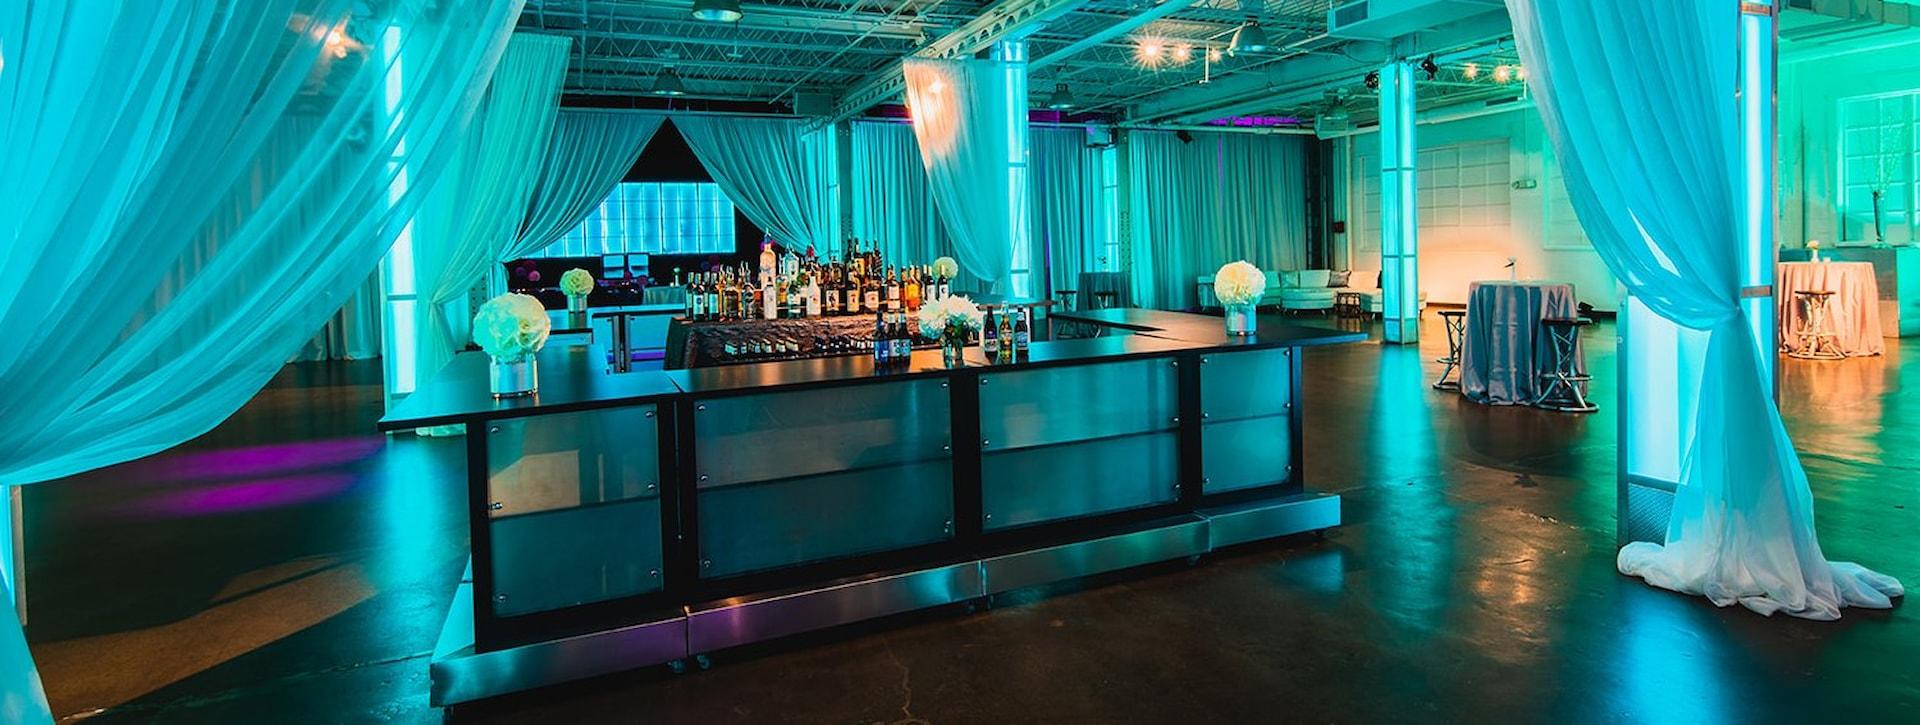 LED Lighted Bar Design Event Downtown Indianapolis